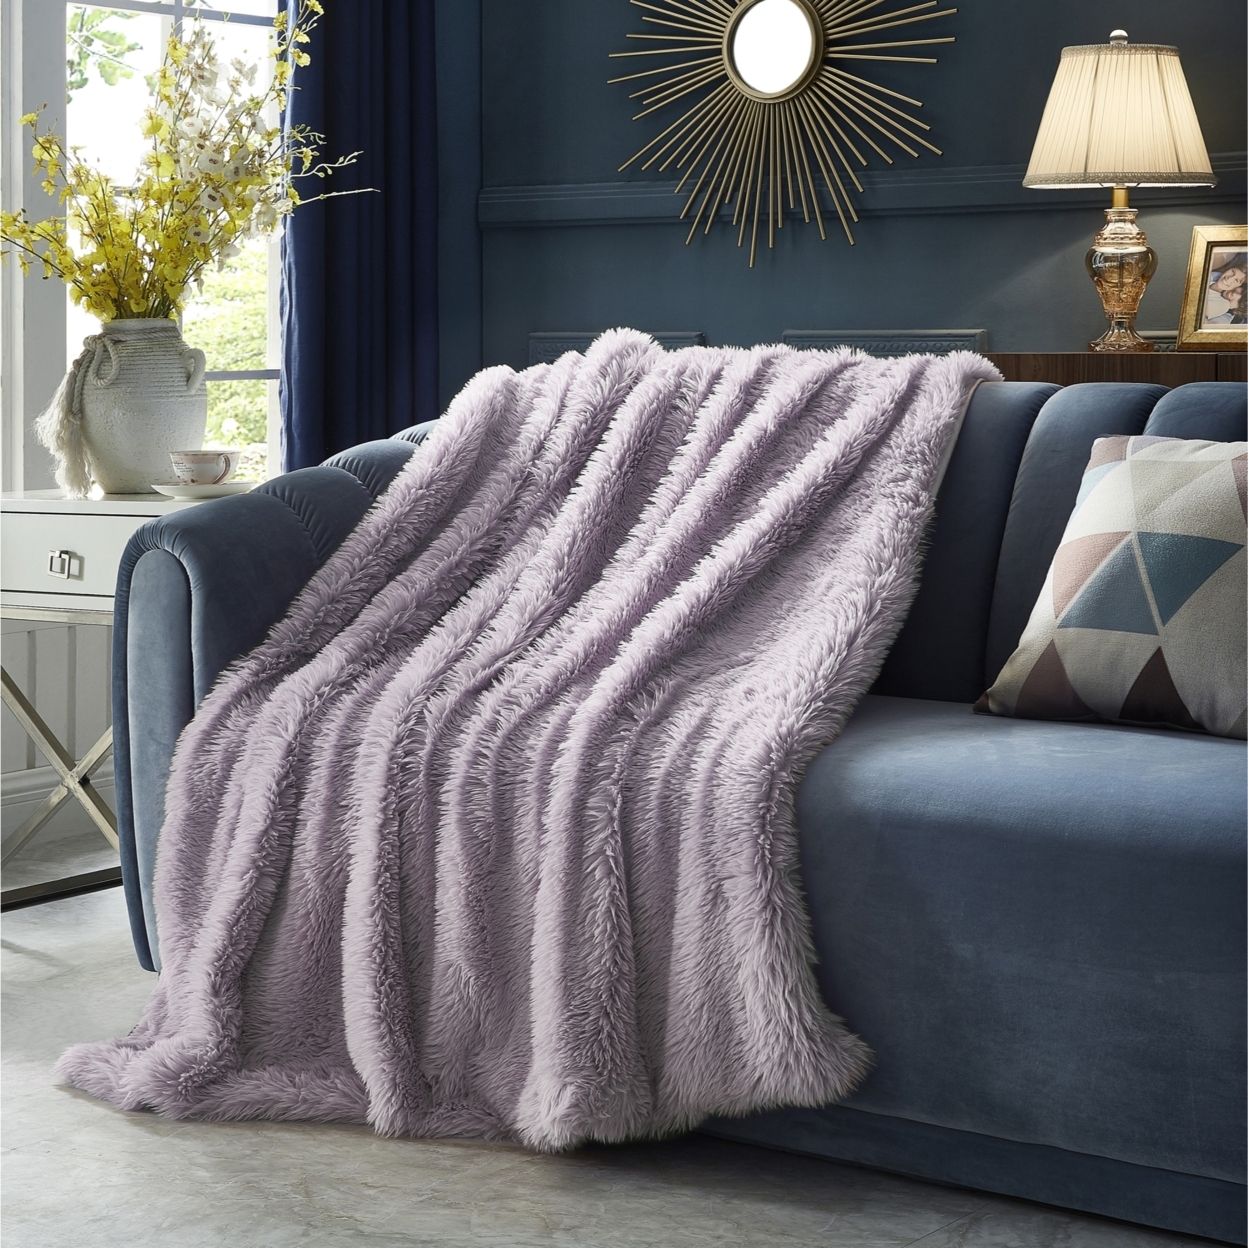 Towny Throw-Reverse Micromink-Cozy-Extra Soft - Lavender